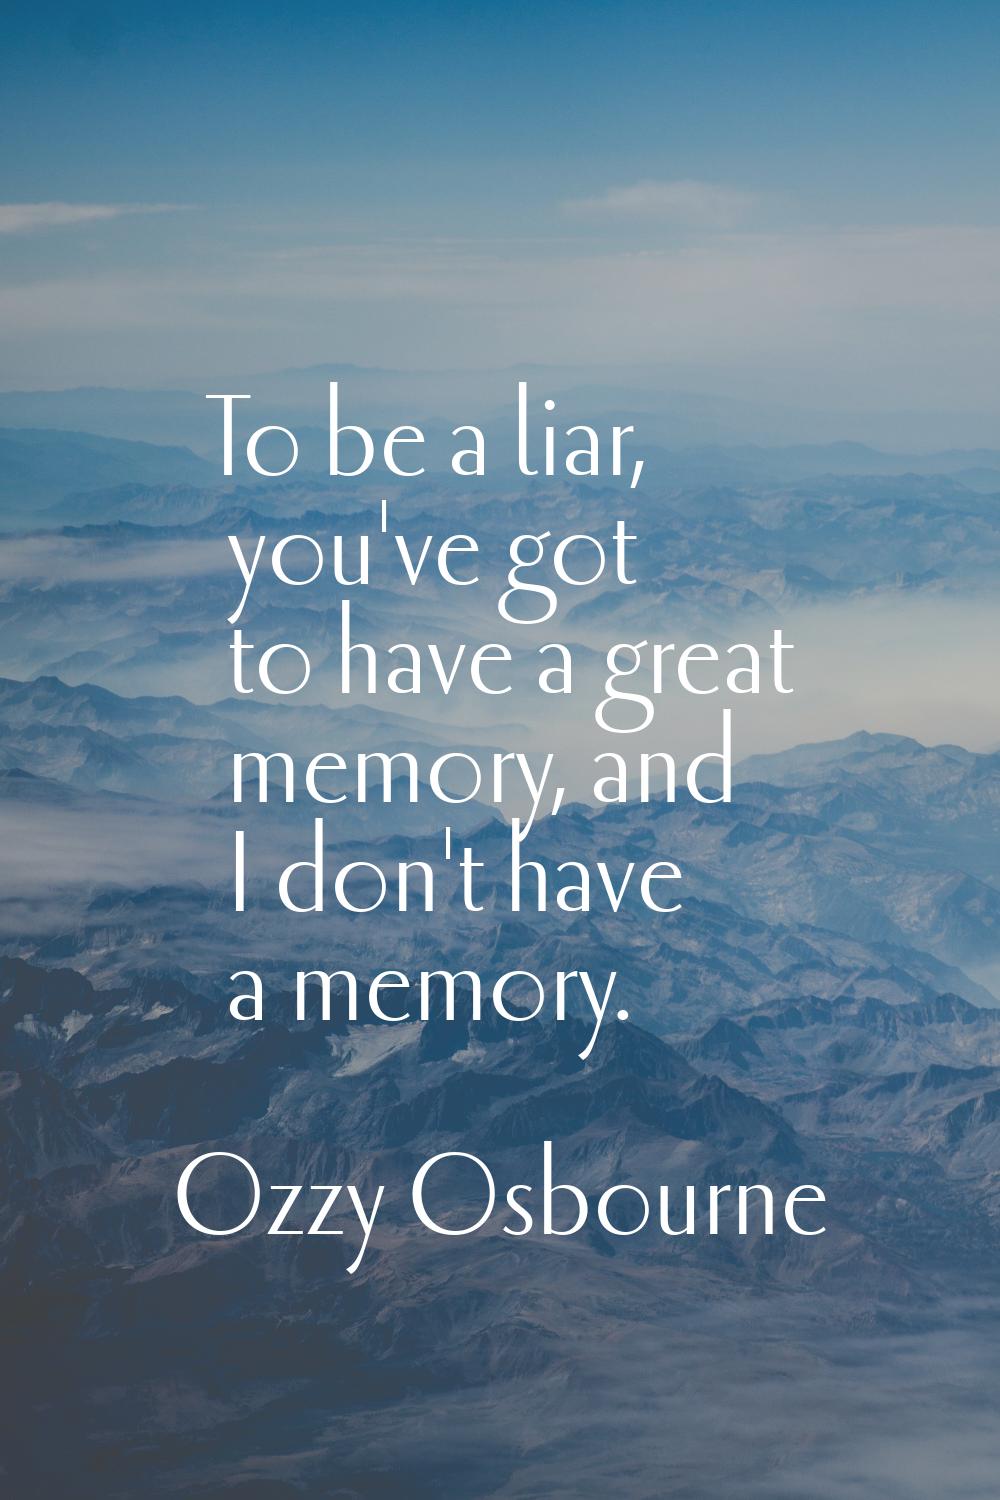 To be a liar, you've got to have a great memory, and I don't have a memory.